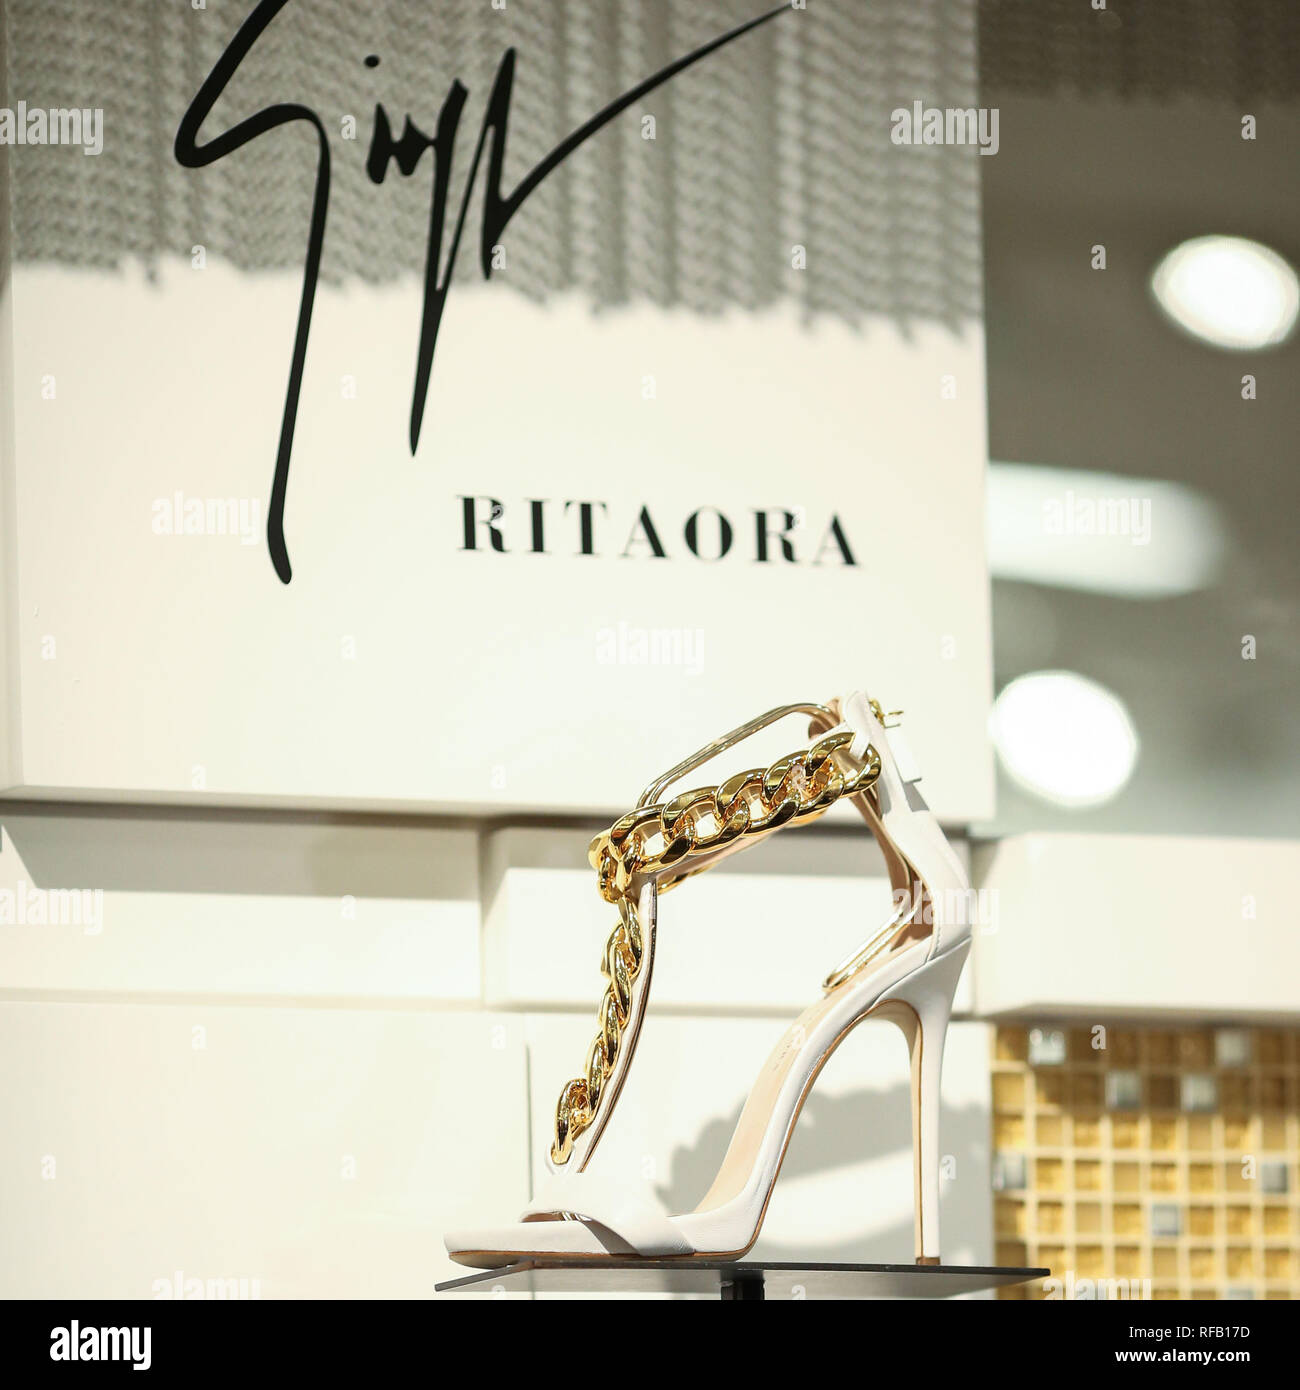 Beverly Hills, Los Angeles, California, USA. 24th January, 2019. Atmosphere at the Zanotti And Rita Ora Collection Launch held at Saks Fifth Avenue Beverly Hills on January 24, 2019 in